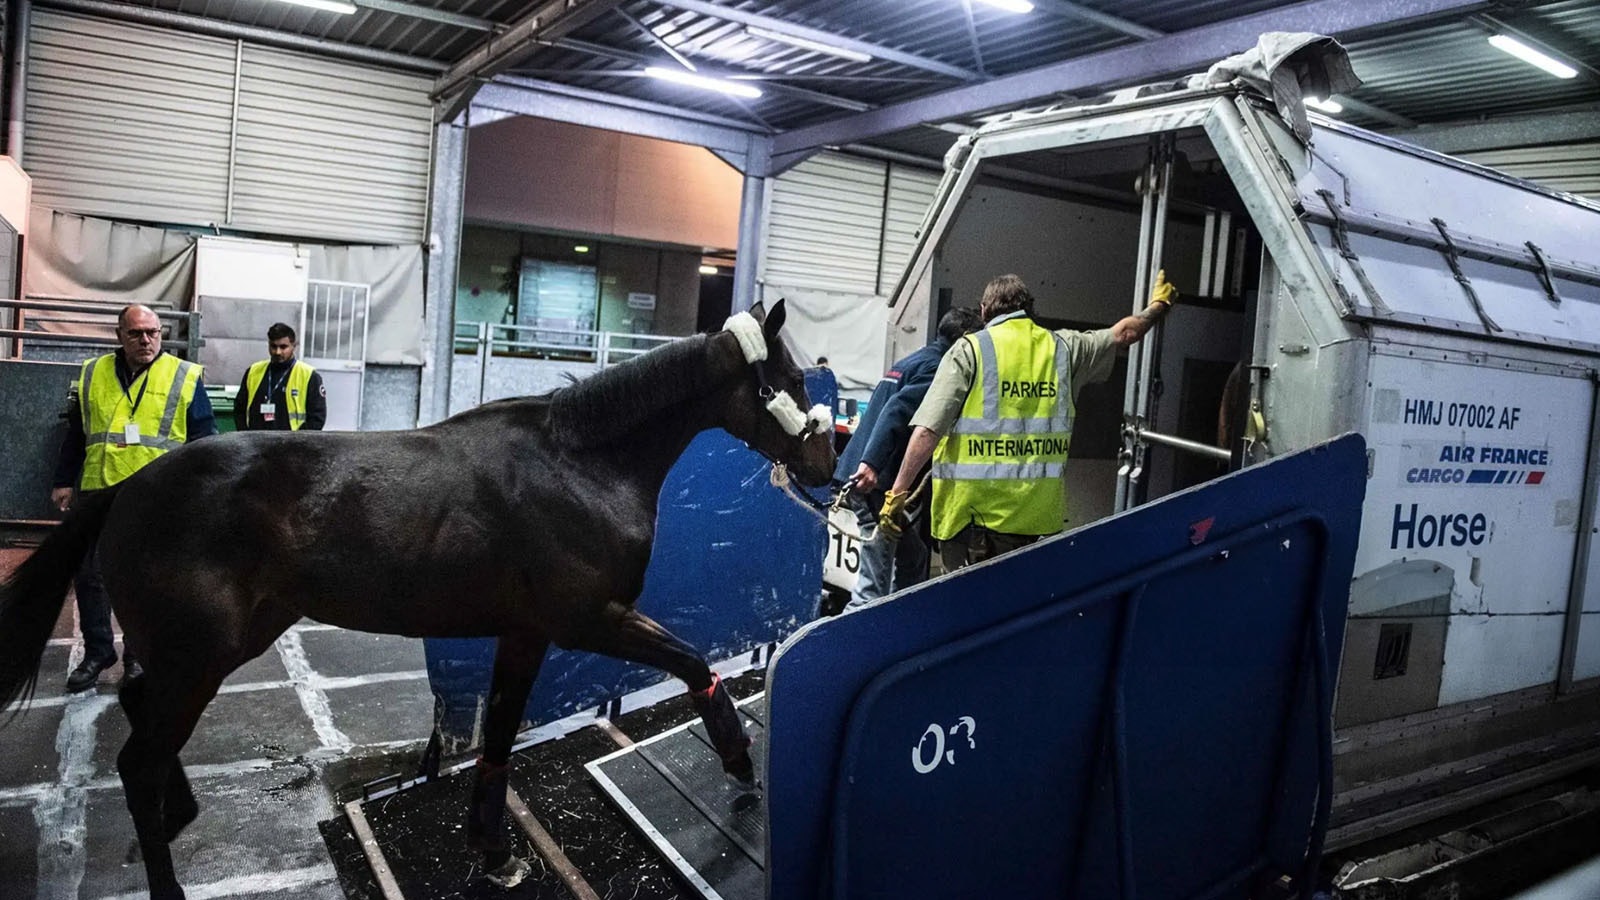 A horse is loaded into an equine transport cargo box in this file photo.